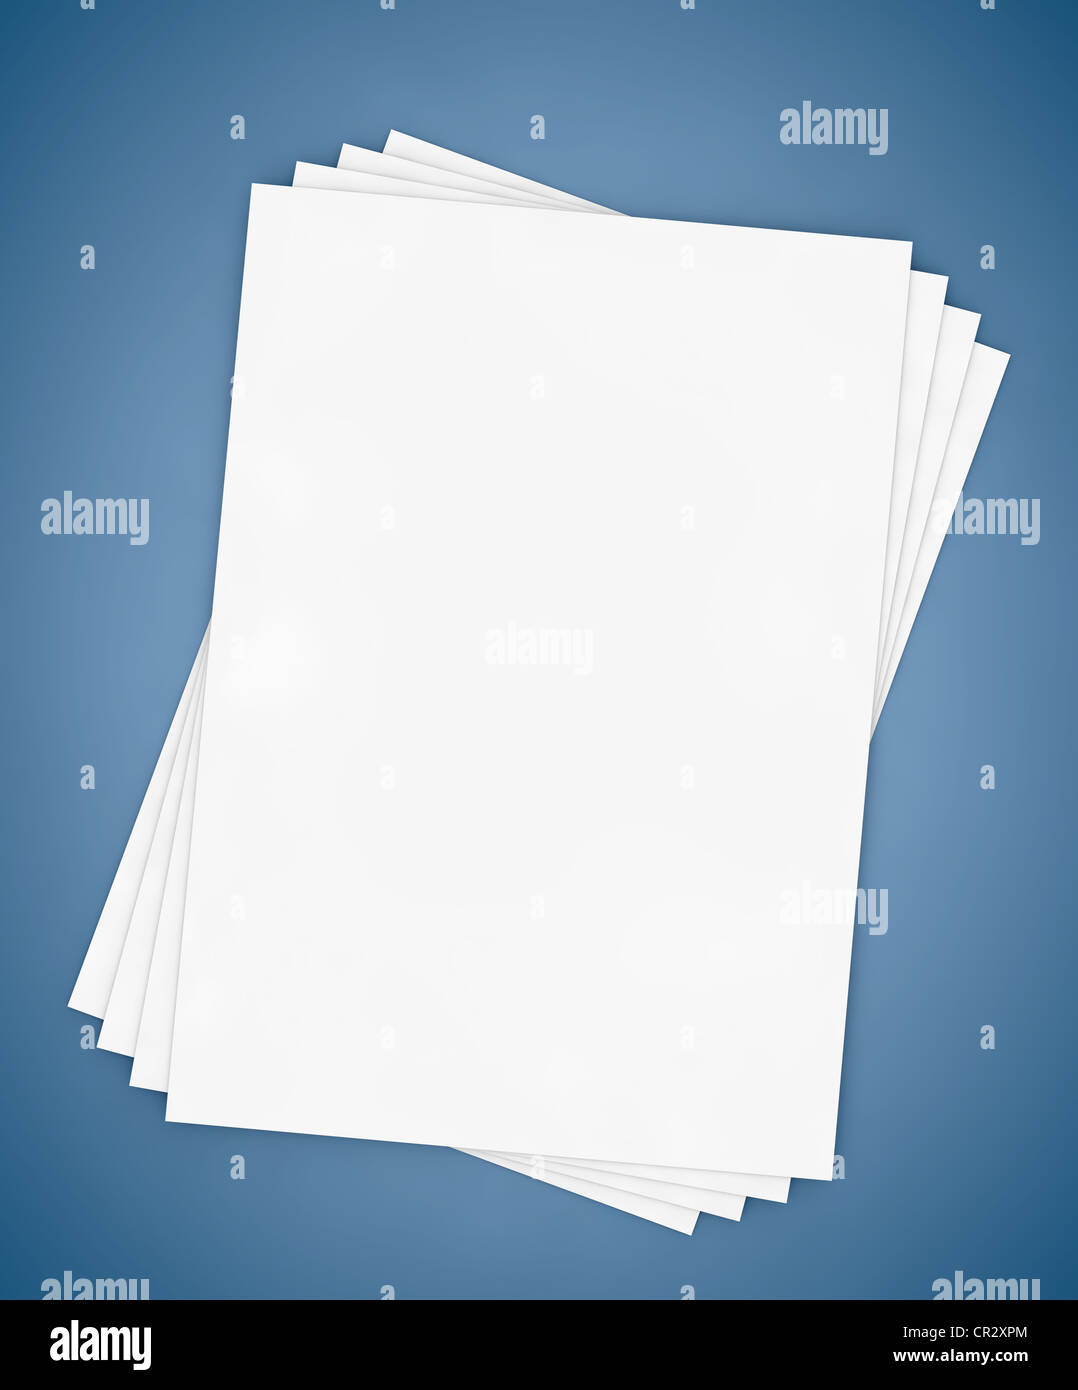 Documents, blank pages with text space, 3D illustration Stock Photo